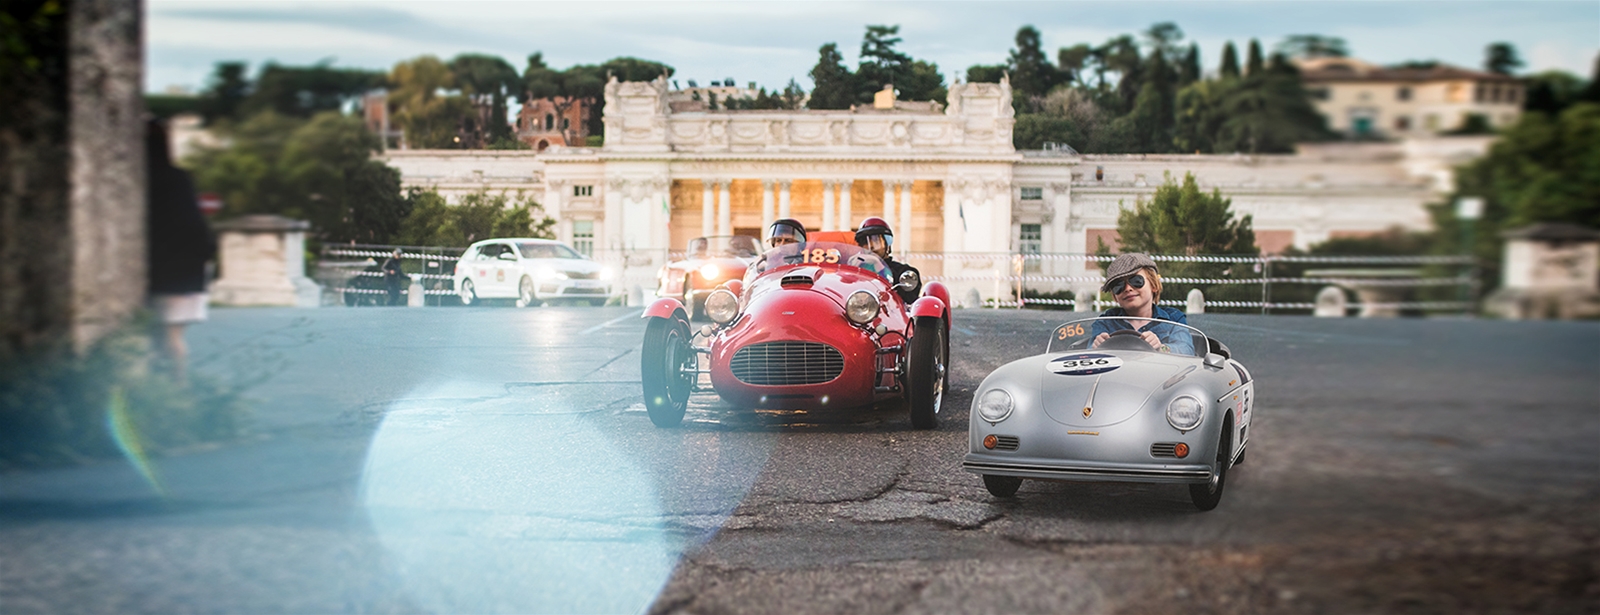 1000 Miglia 2019 sooner or later we will realise your Classic dream